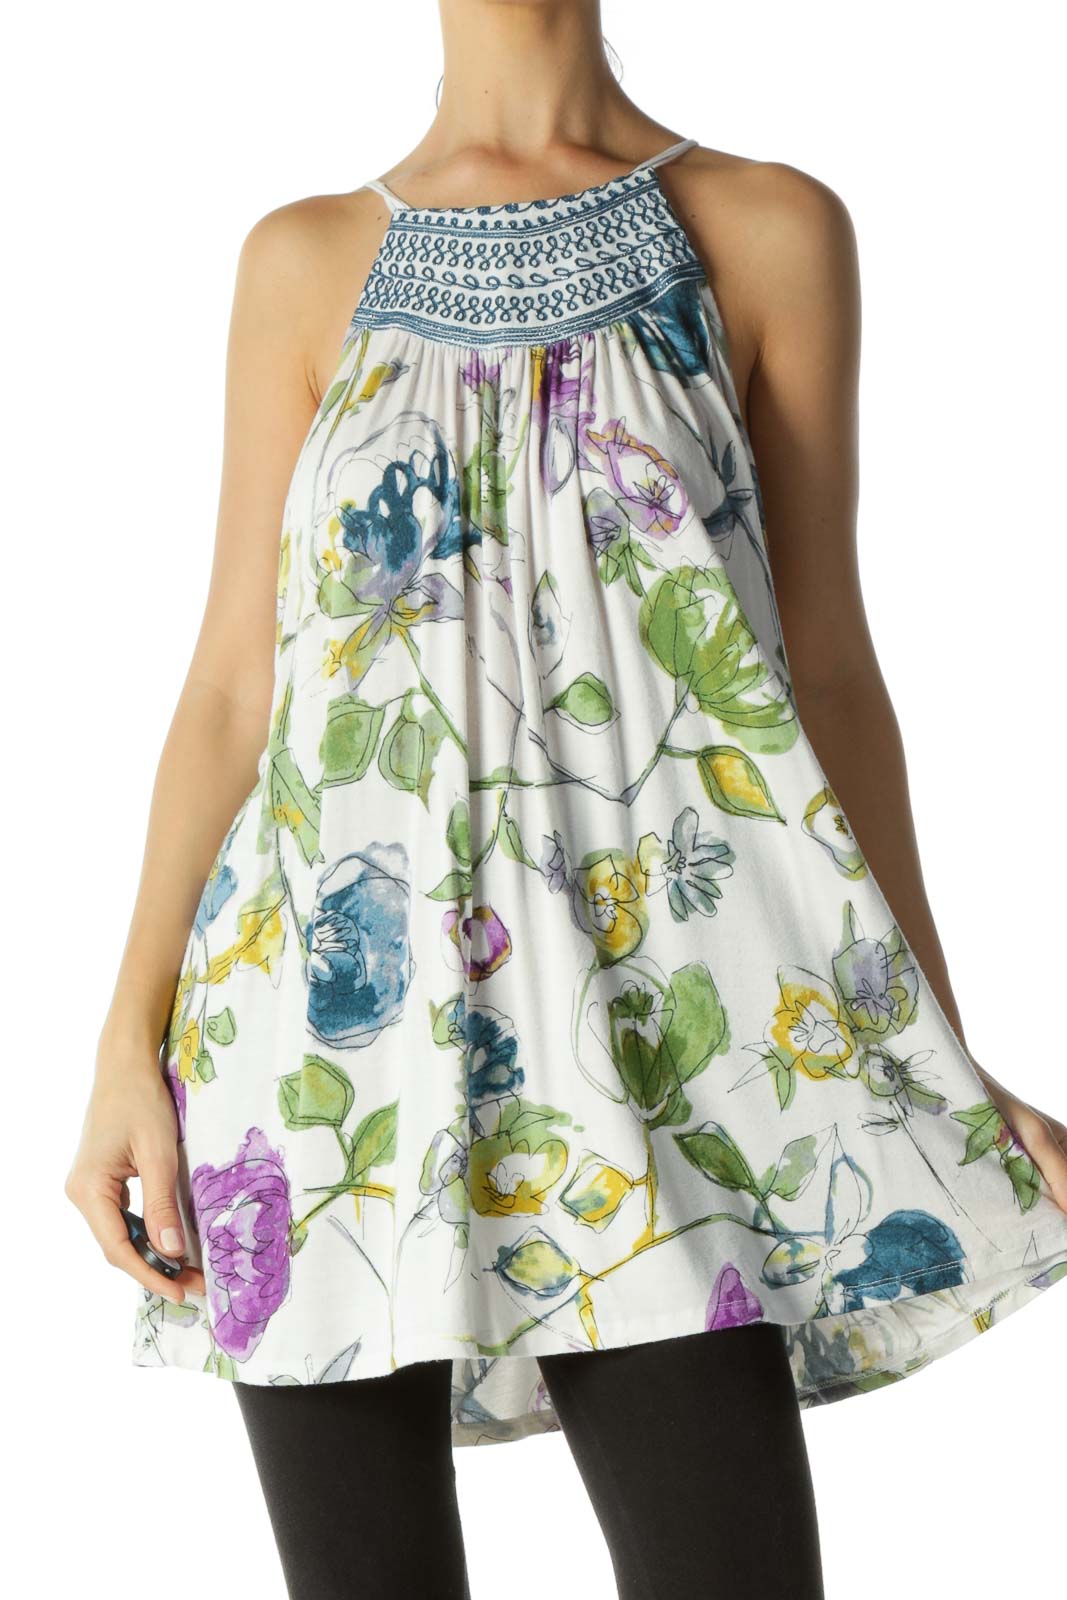 Blue Yellow Purple Floral Print Embroidered Neckline Flared Sleeveless Top Front